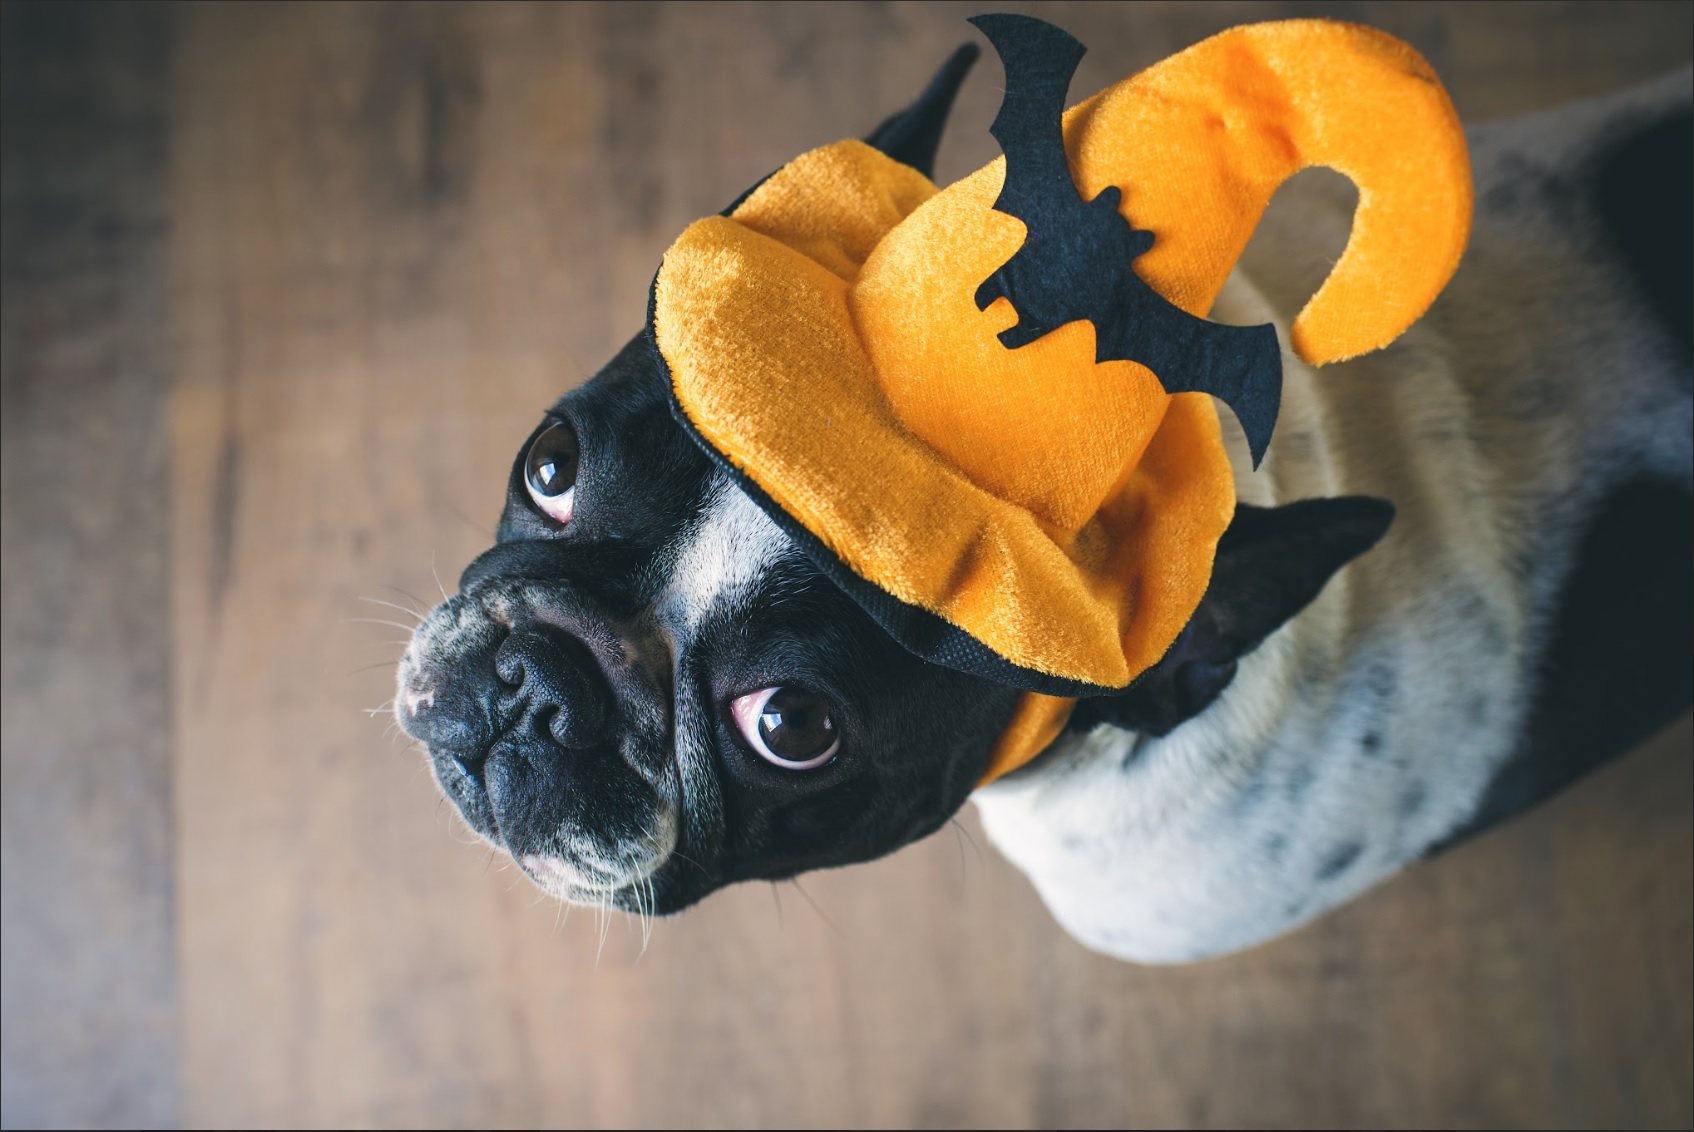 Doggy Halloween will be held at Central wine bar Stazione Novella on October 29 from 11am-2pm. Photo: Stazione Novella